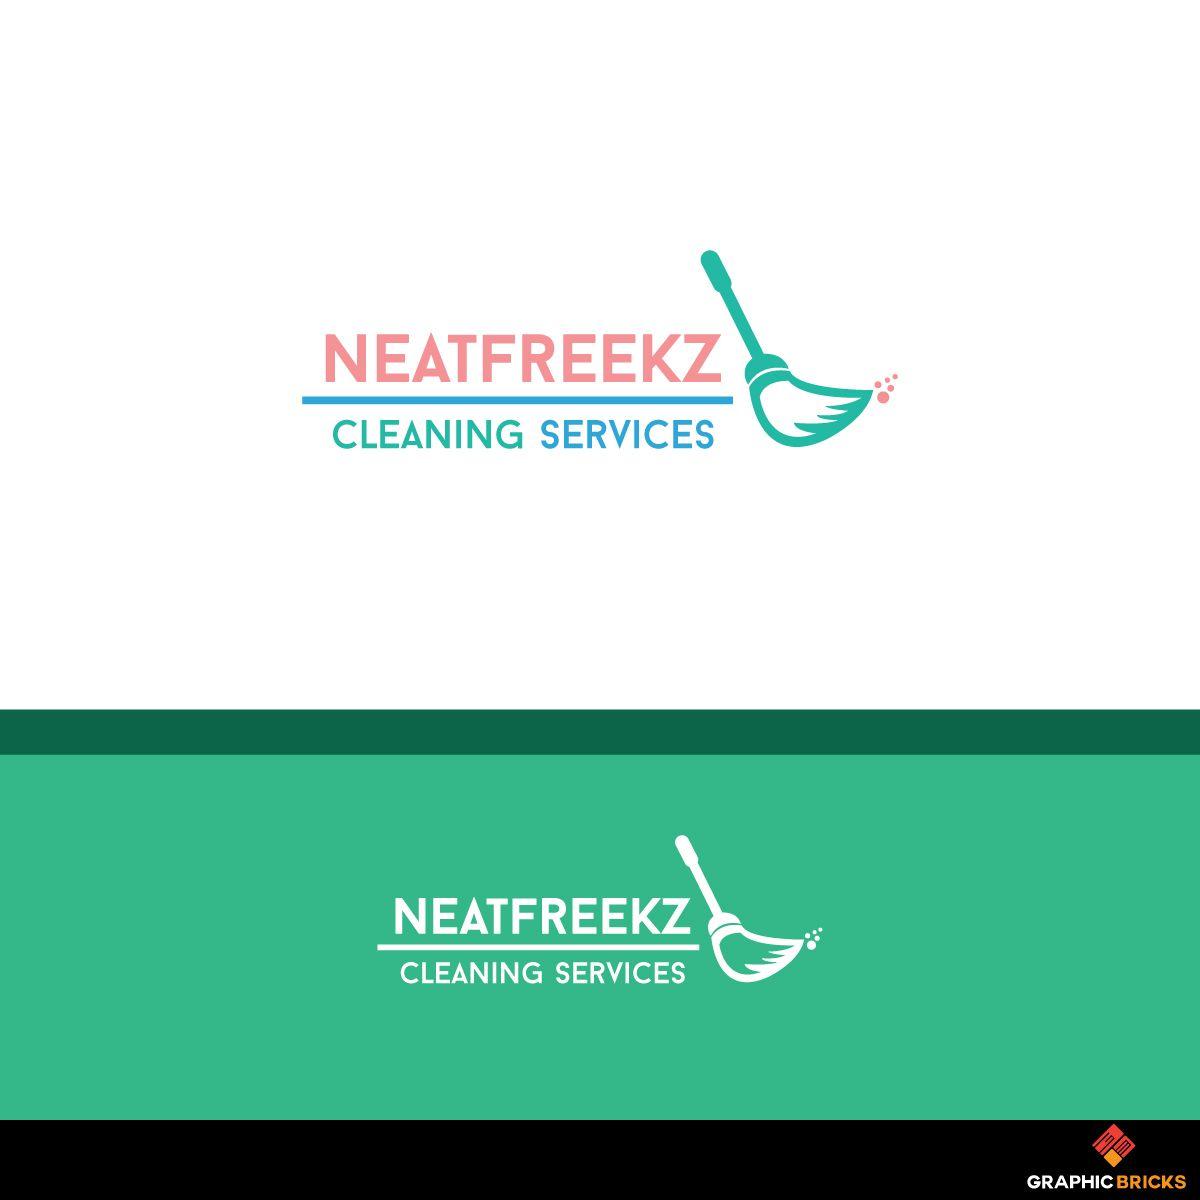 Neat Logo - Modern, Bold, Office Cleaning Logo Design for Neat Freekz Cleaning